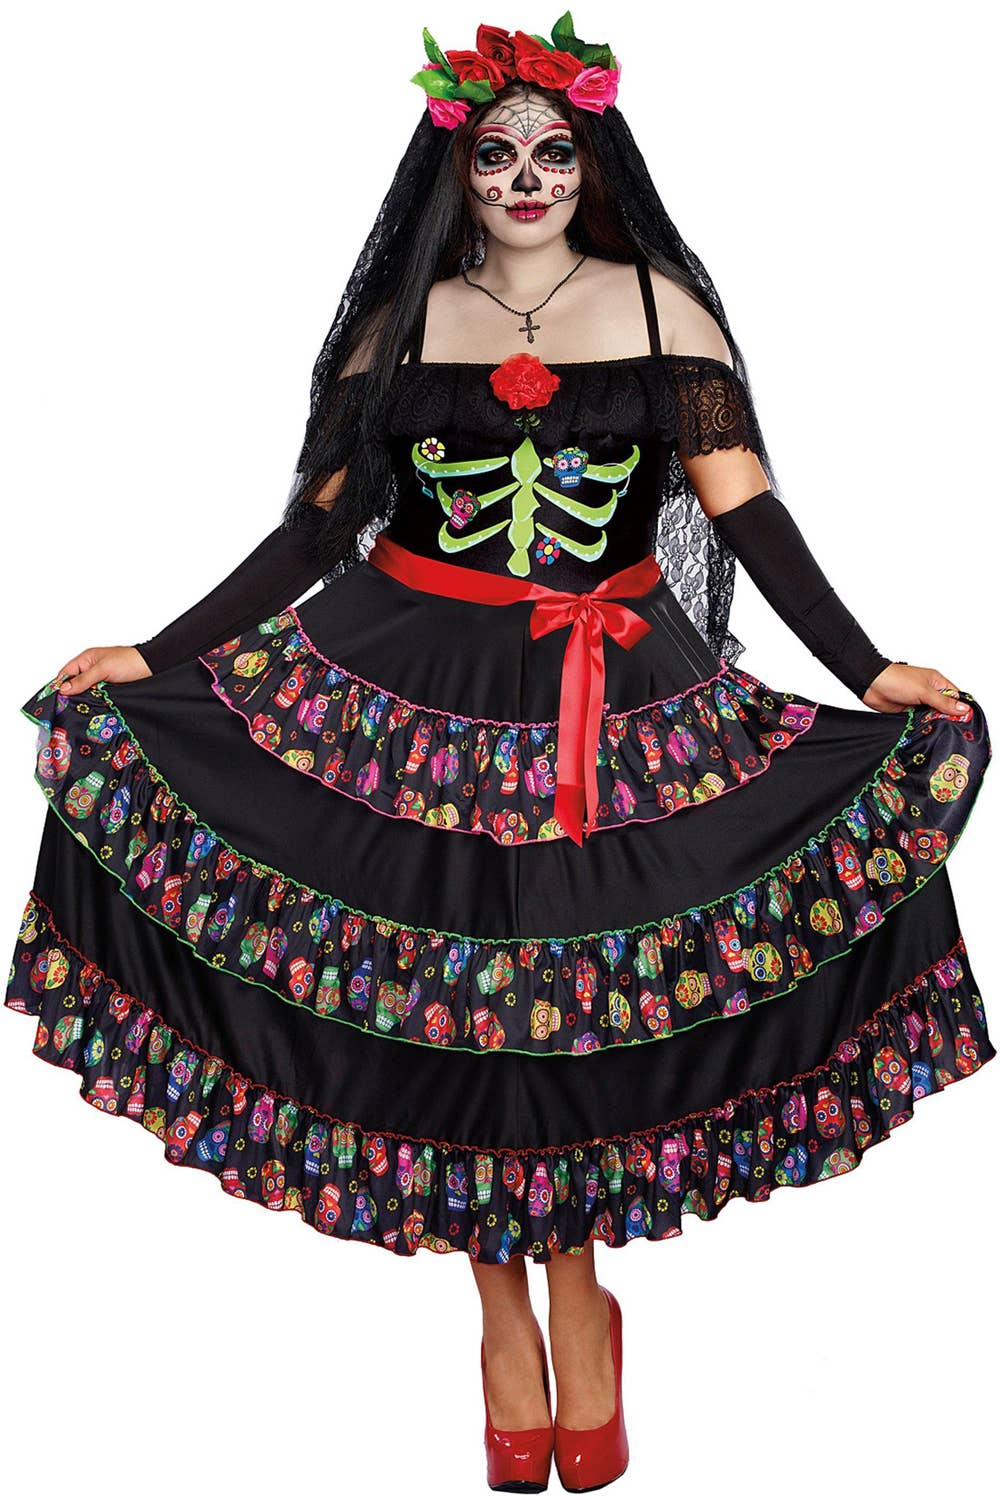 Women's Lady of the Dead Plus Size Costume - Front Image